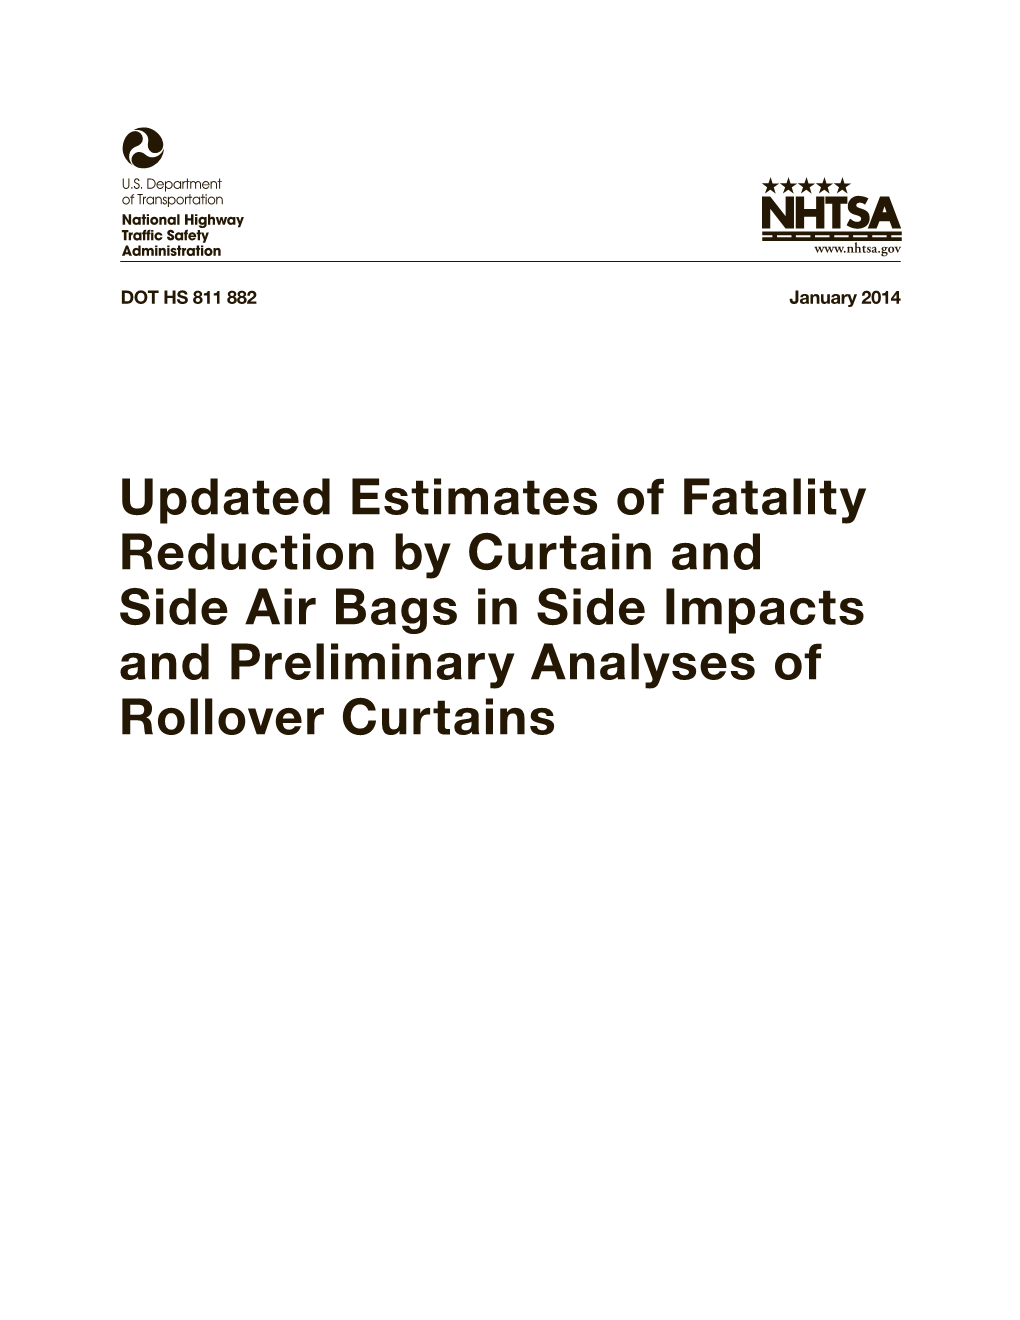 Updated Estimates of Fatality Reduction by Curtain and Side Air Bags in Side Impacts and Preliminary Analyses of Rollover Curtains DISCLAIMER